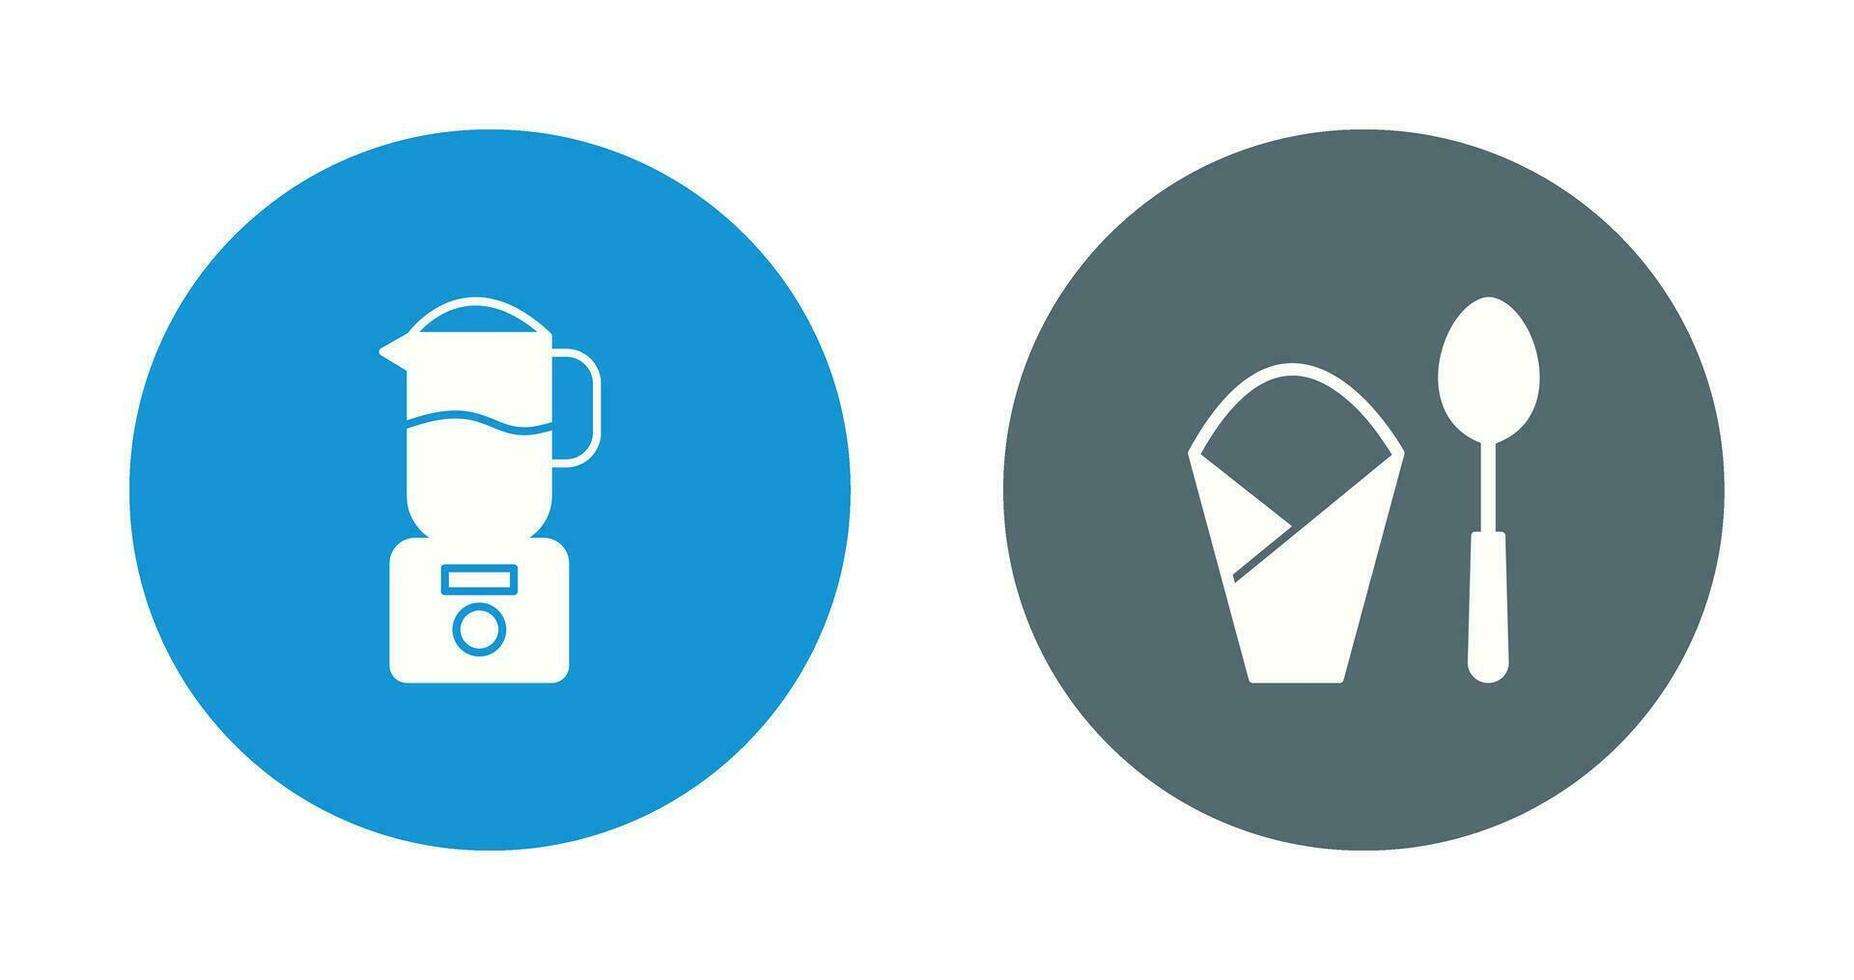 blender and spoon  Icon vector